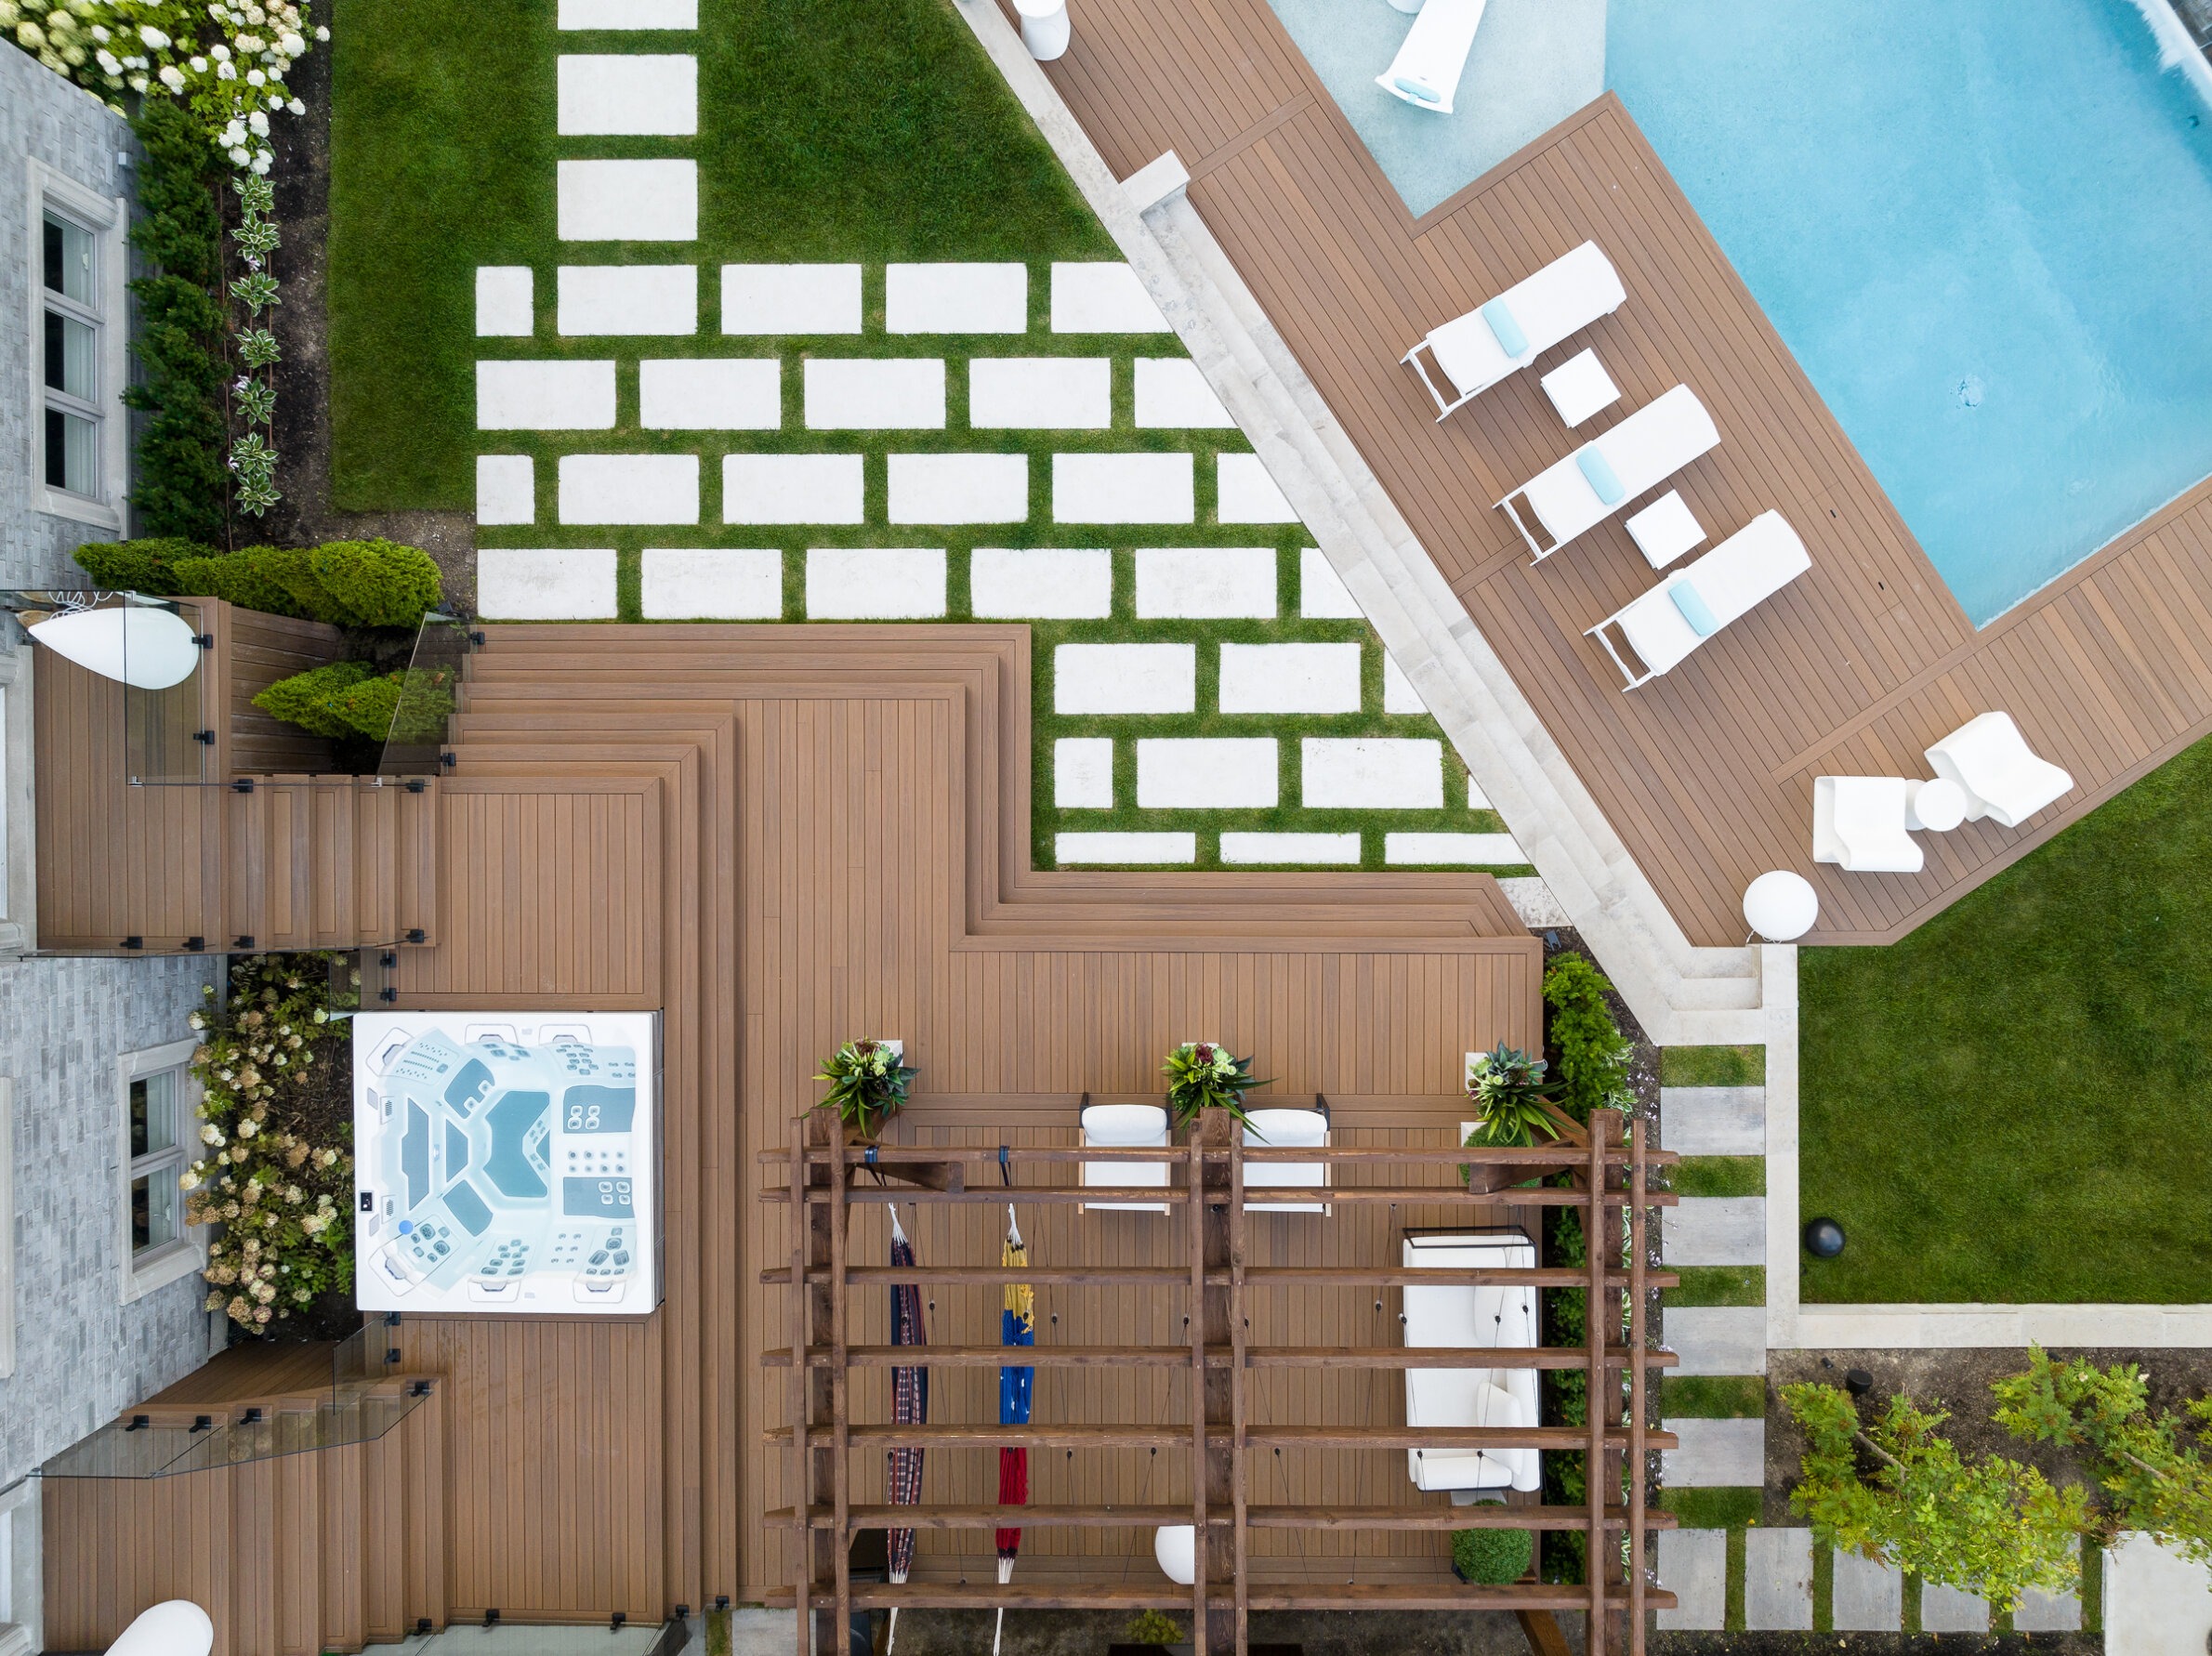 Aerial view of a backyard with a pool, sun loungers, hot tub, patterned grass squares, wood decking, and neatly landscaped plants.